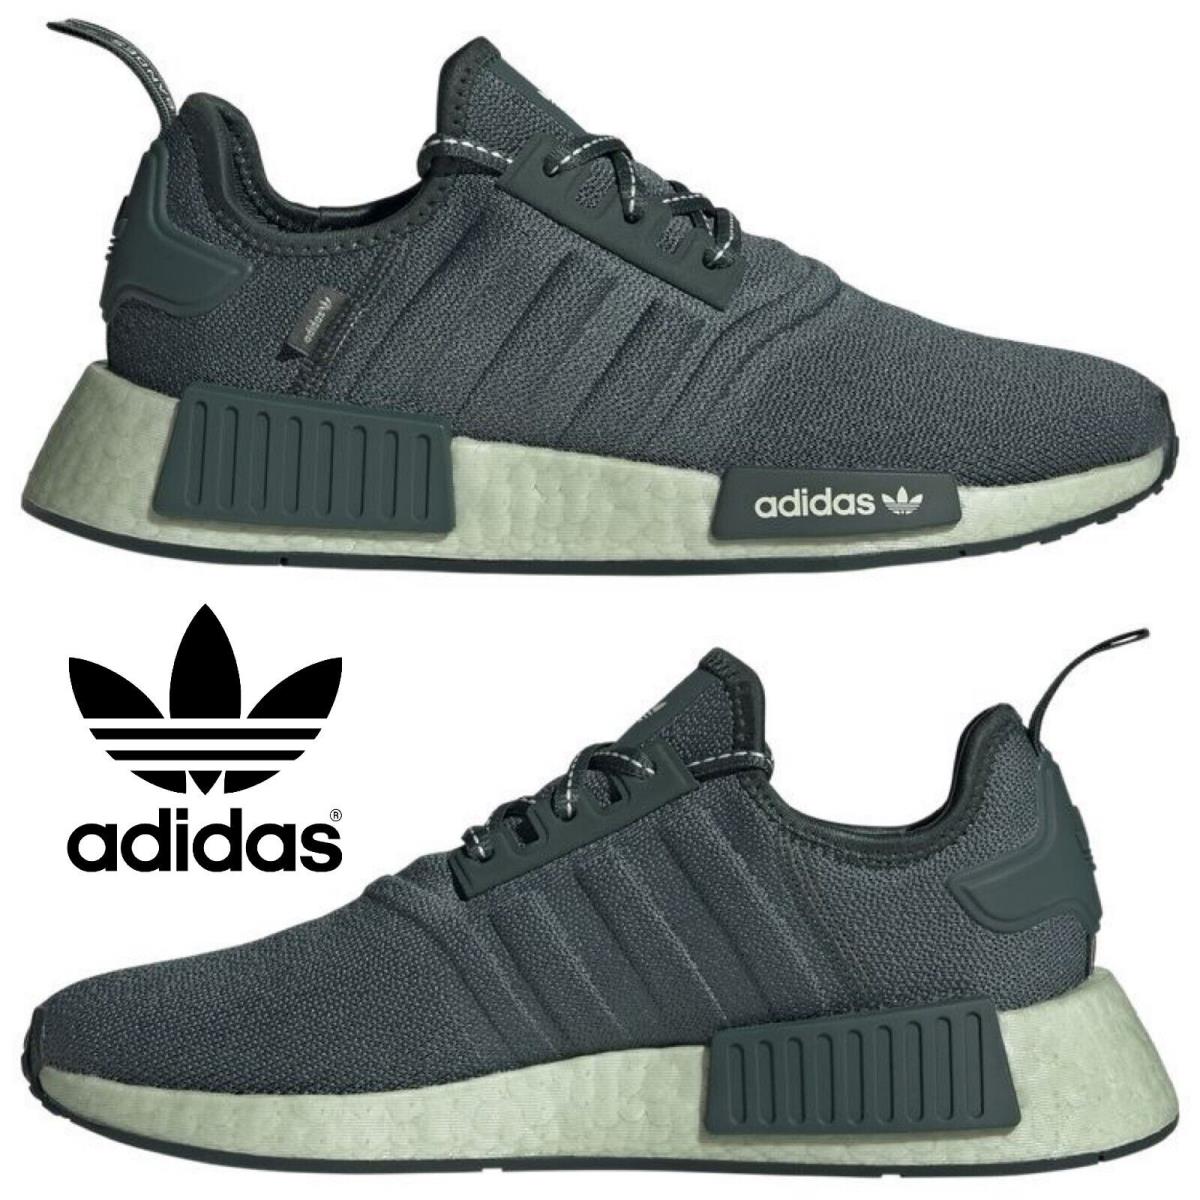 Adidas Originals Nmd R1 Women s Sneakers Casual Shoes Sport Running Green